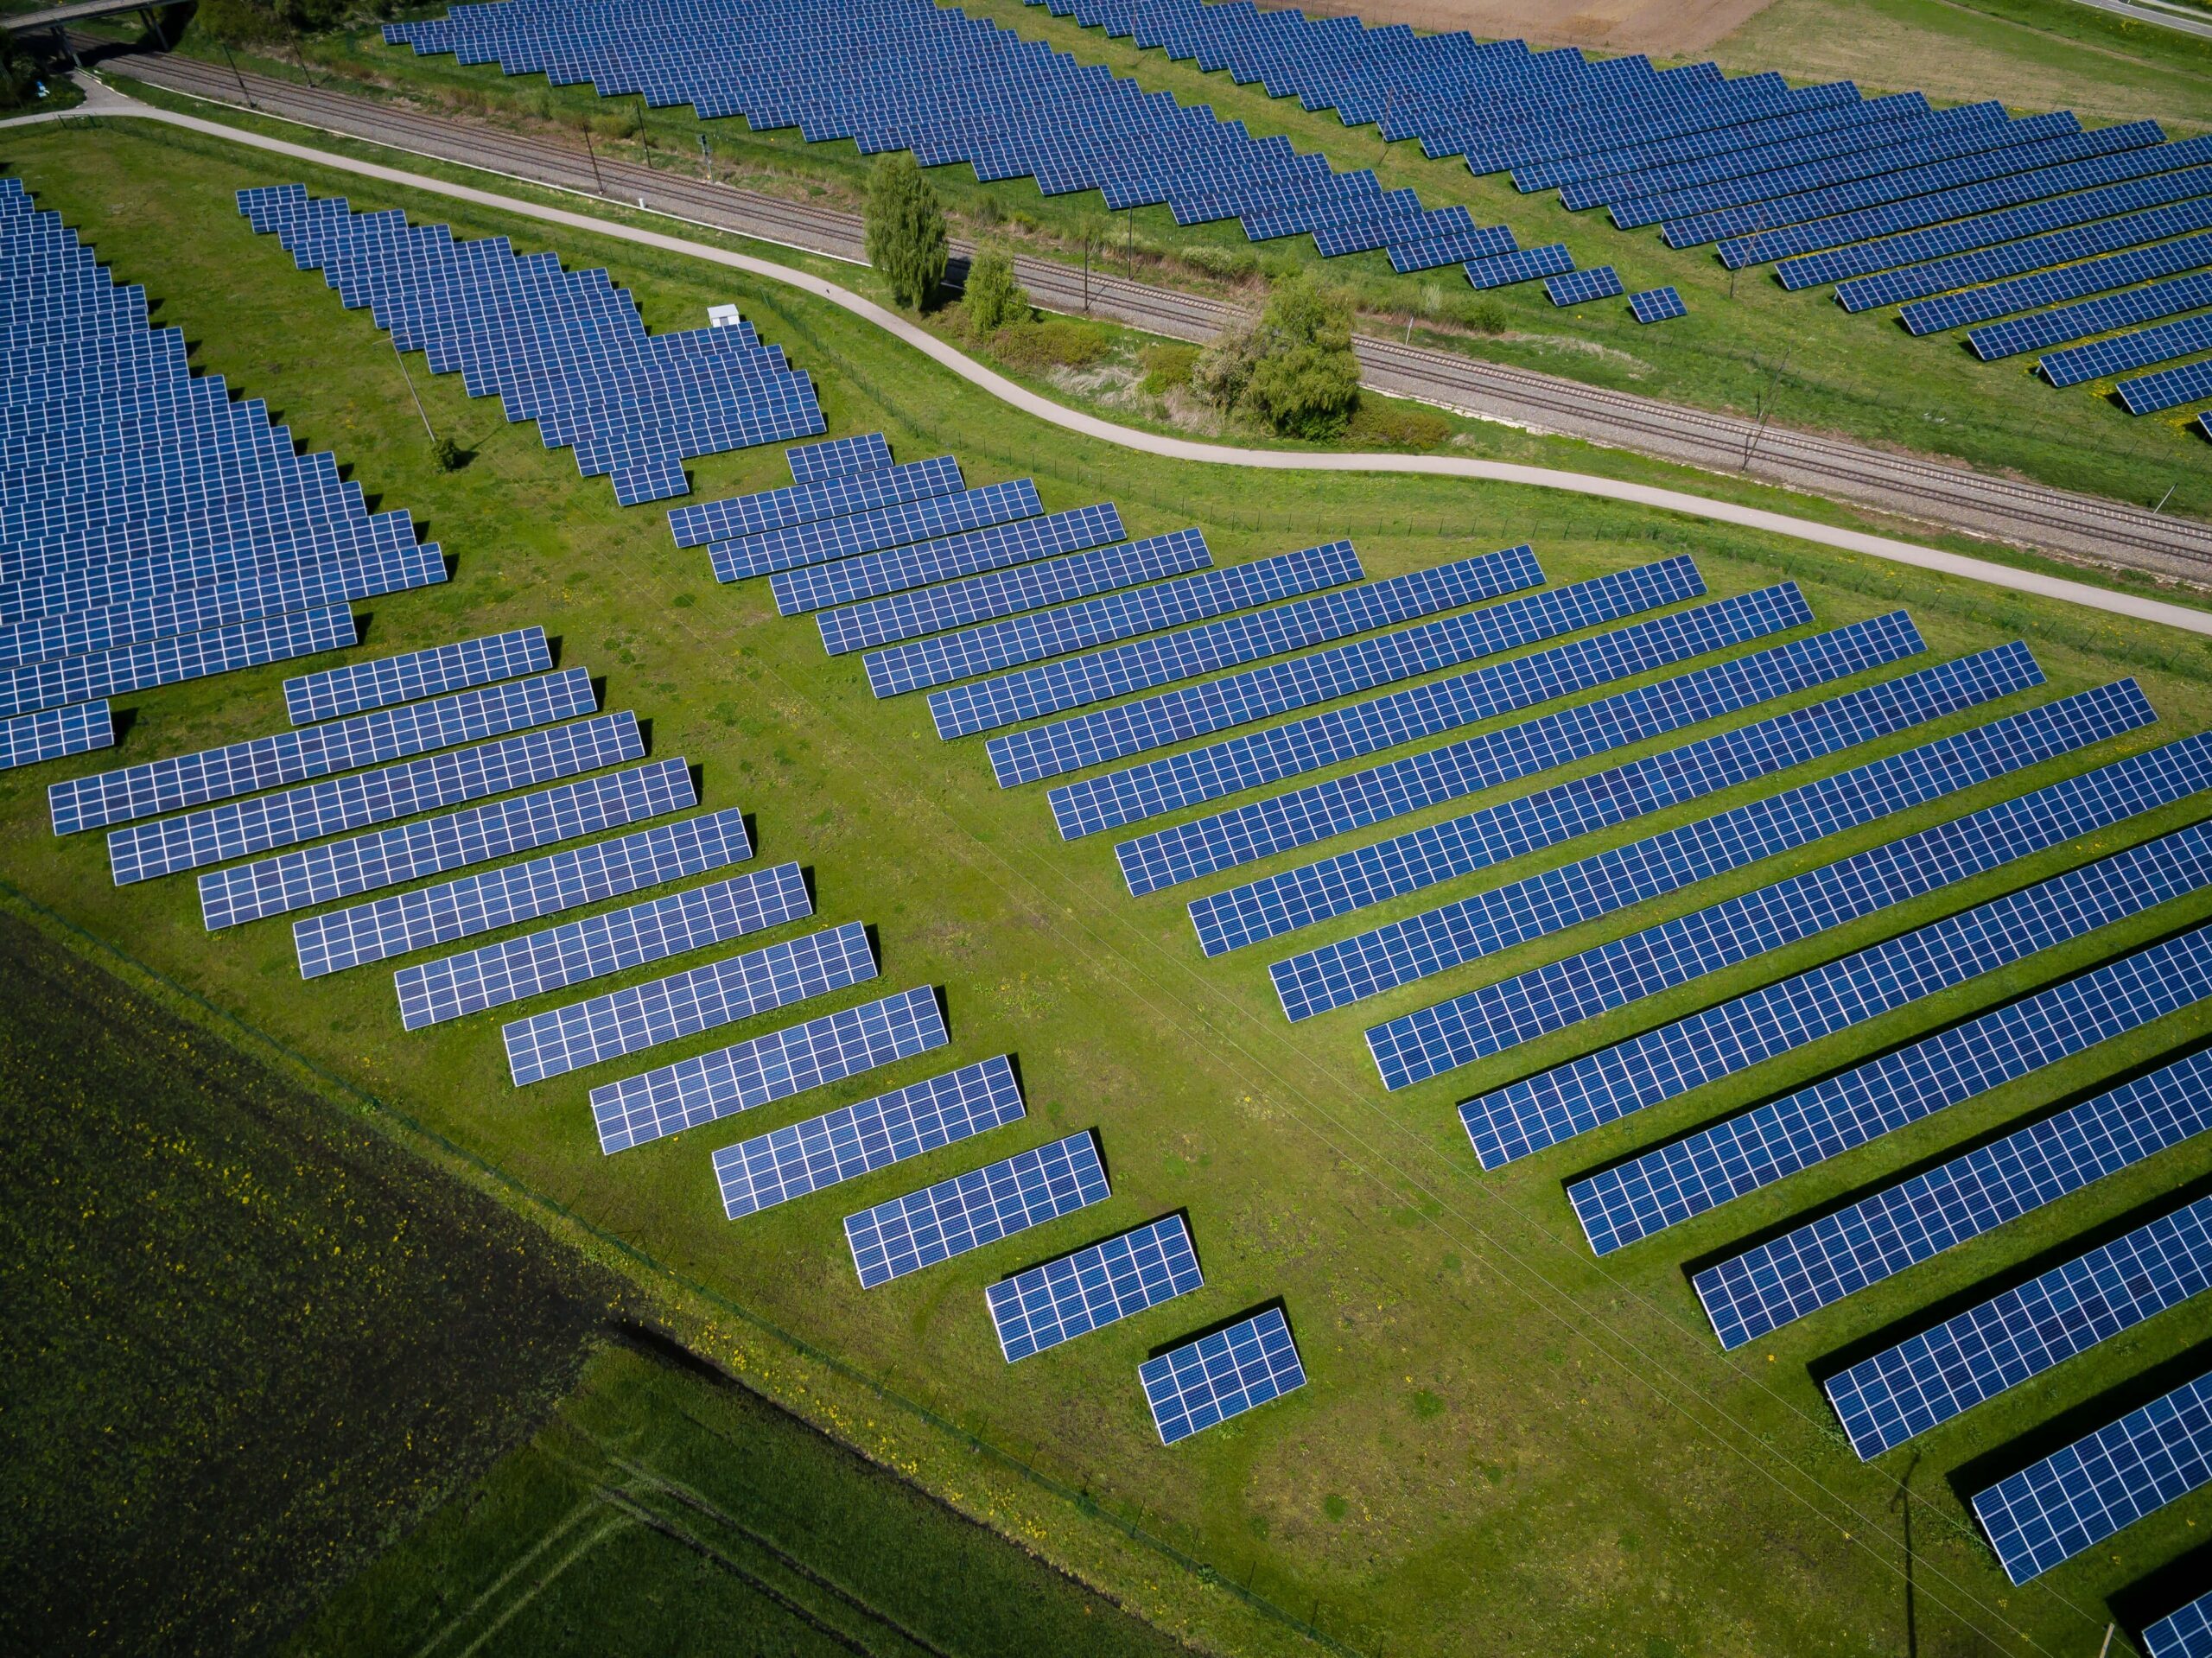 Private and Public Investment In Renewable Energy Is Expanding